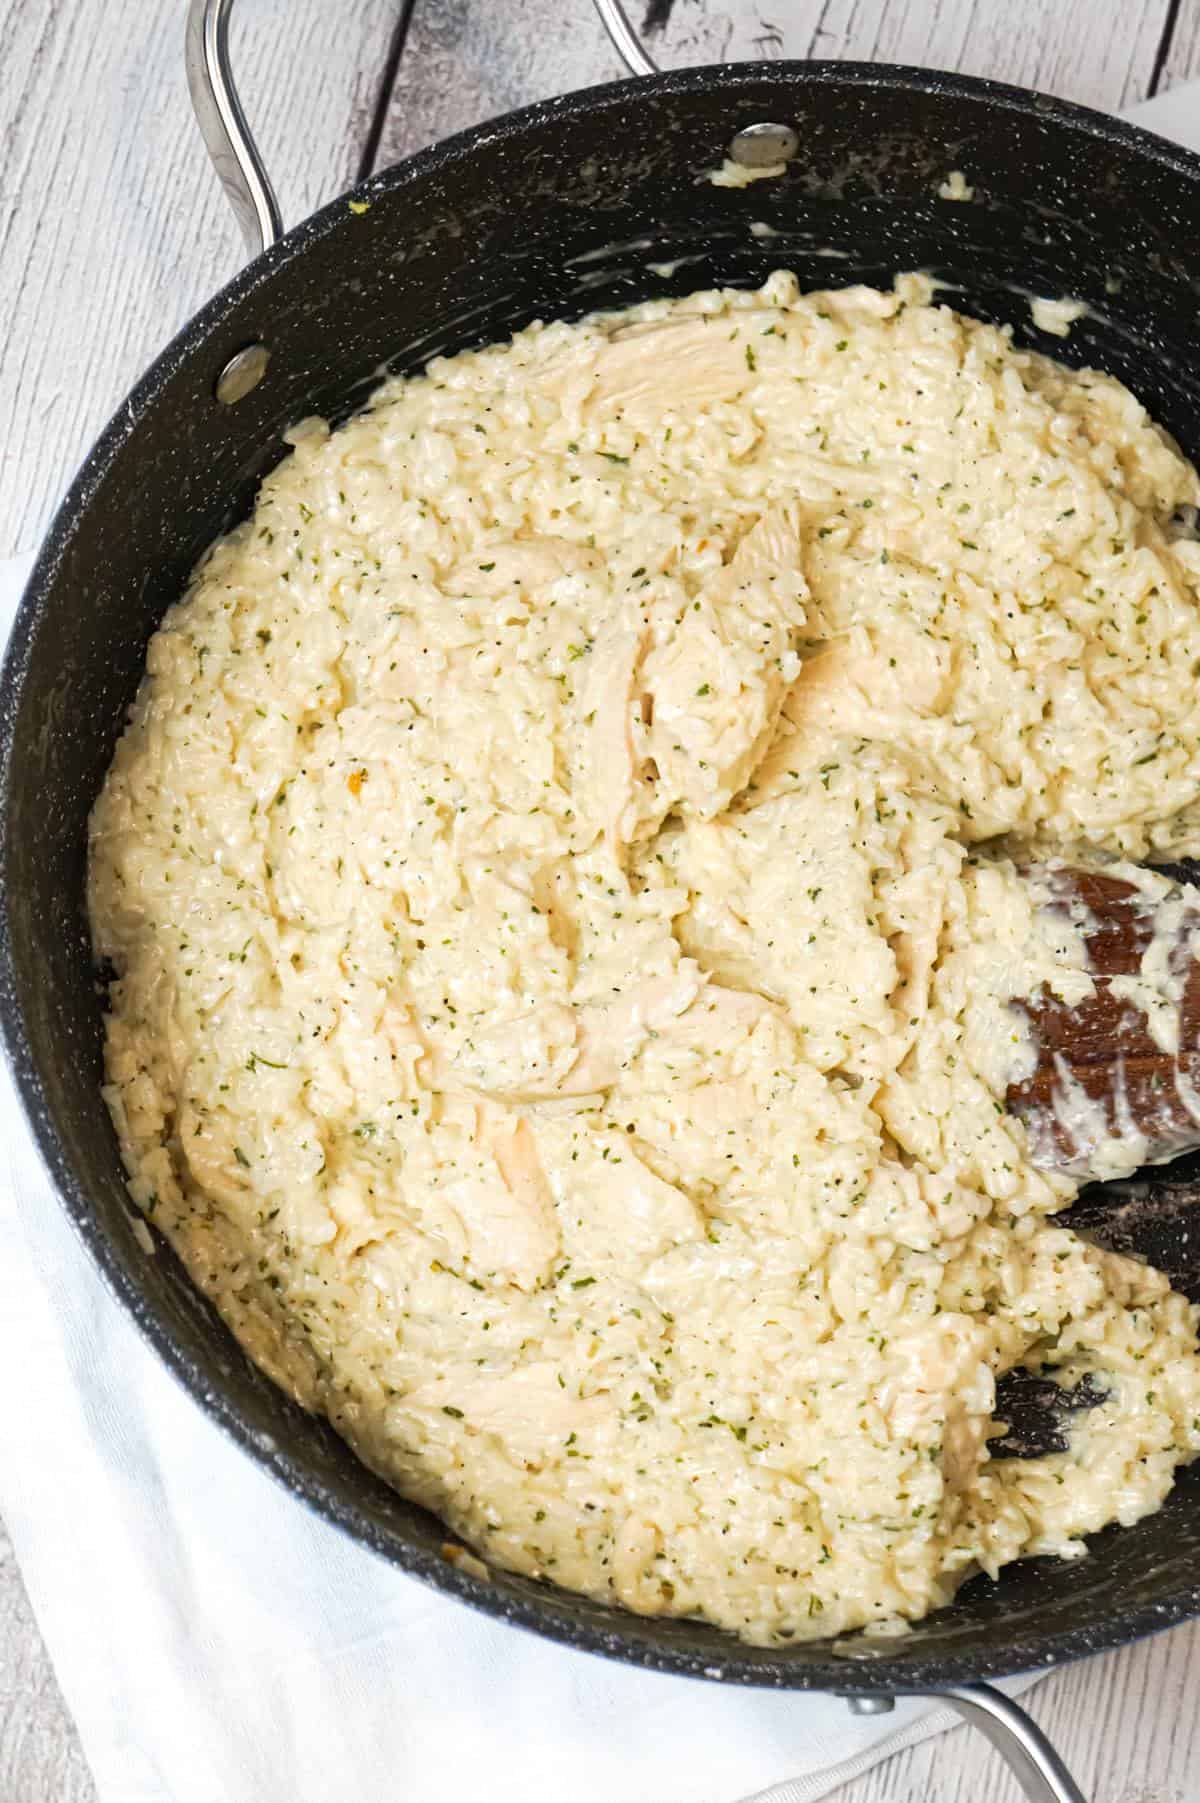 One Pot Garlic Parmesan Chicken and Rice is an easy weeknight dinner recipe made with boneless, skinless chicken breasts, Minute rice, garlic puree, cream and Parmesan cheese.